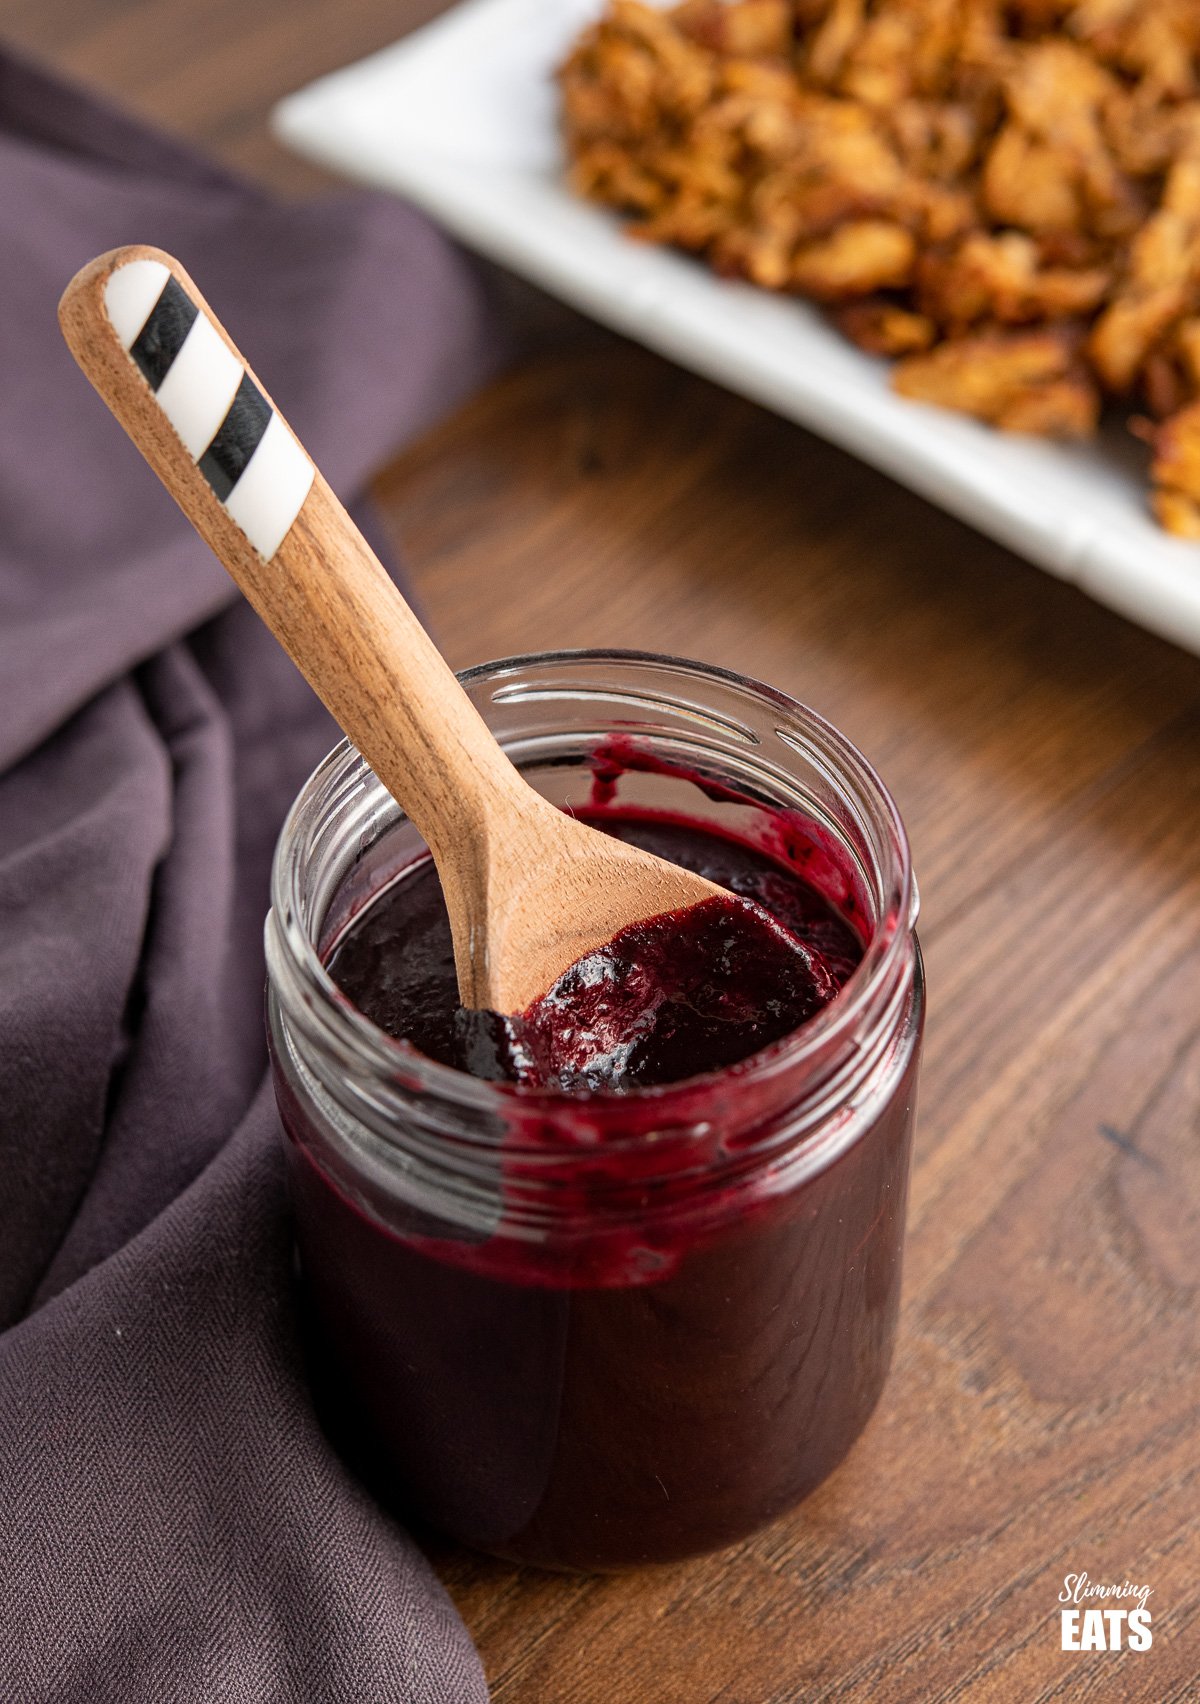 blueberry bbq sauce in jar with wooden spoon with black and white stripes on handle